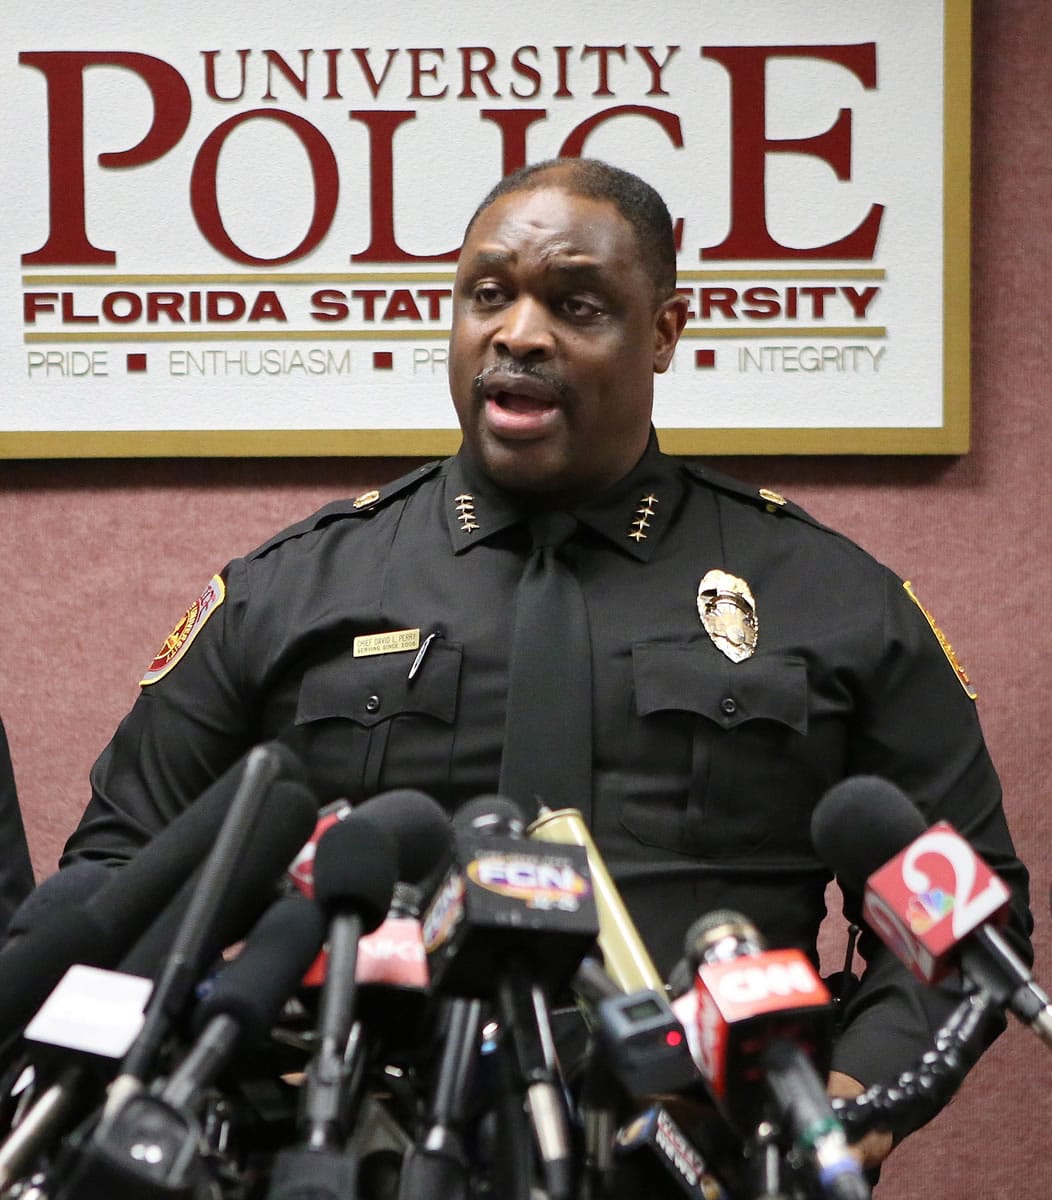 Florida State University police chief David Perry speaks at a news conference concerning the on-campus shooting on Thursday in Tallahassee, Fla.